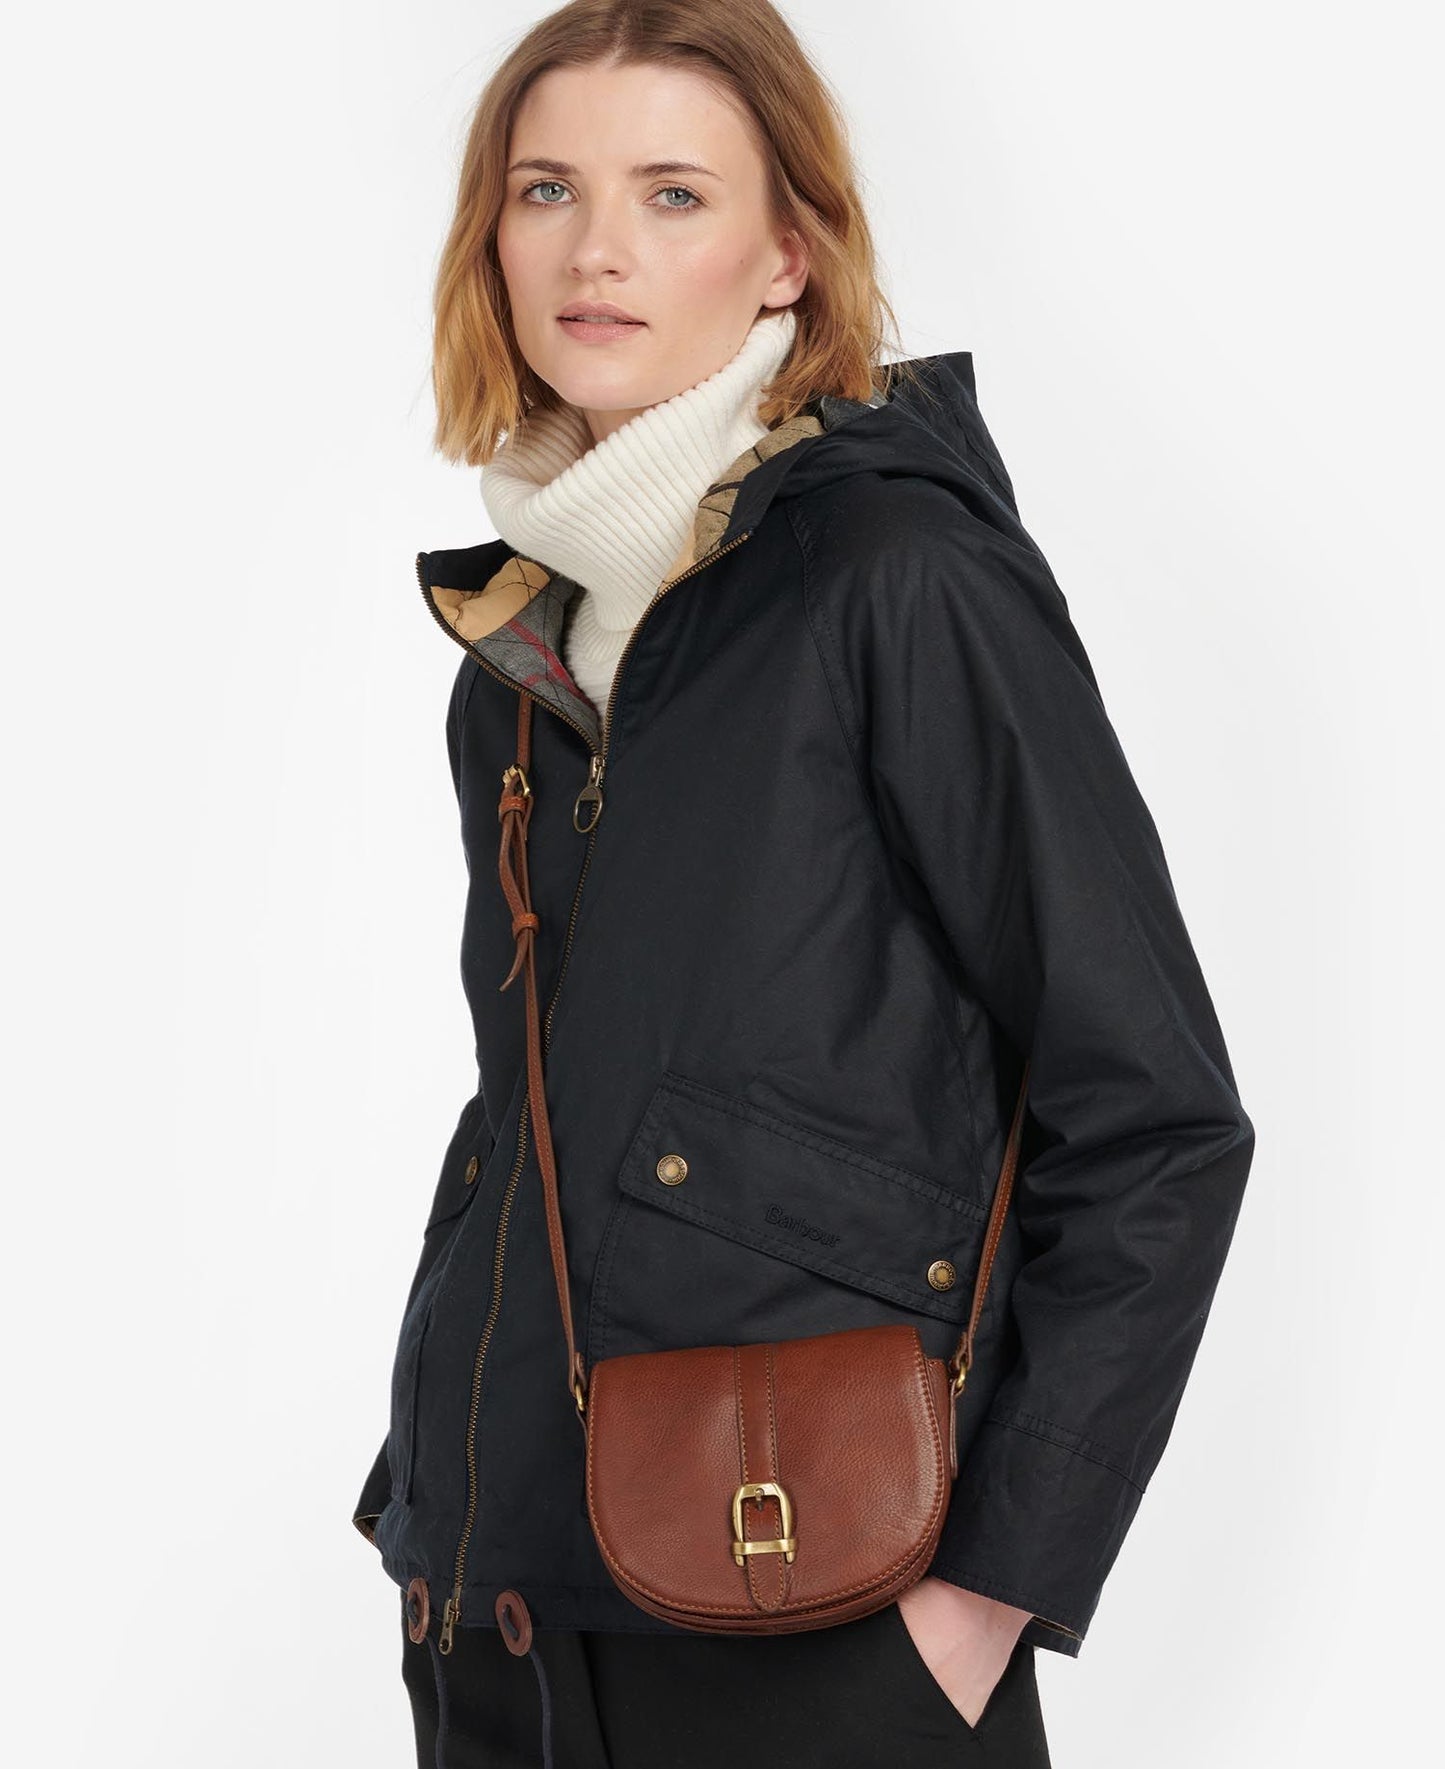 Barbour Bag Woman Laire Leather Saddle Brown